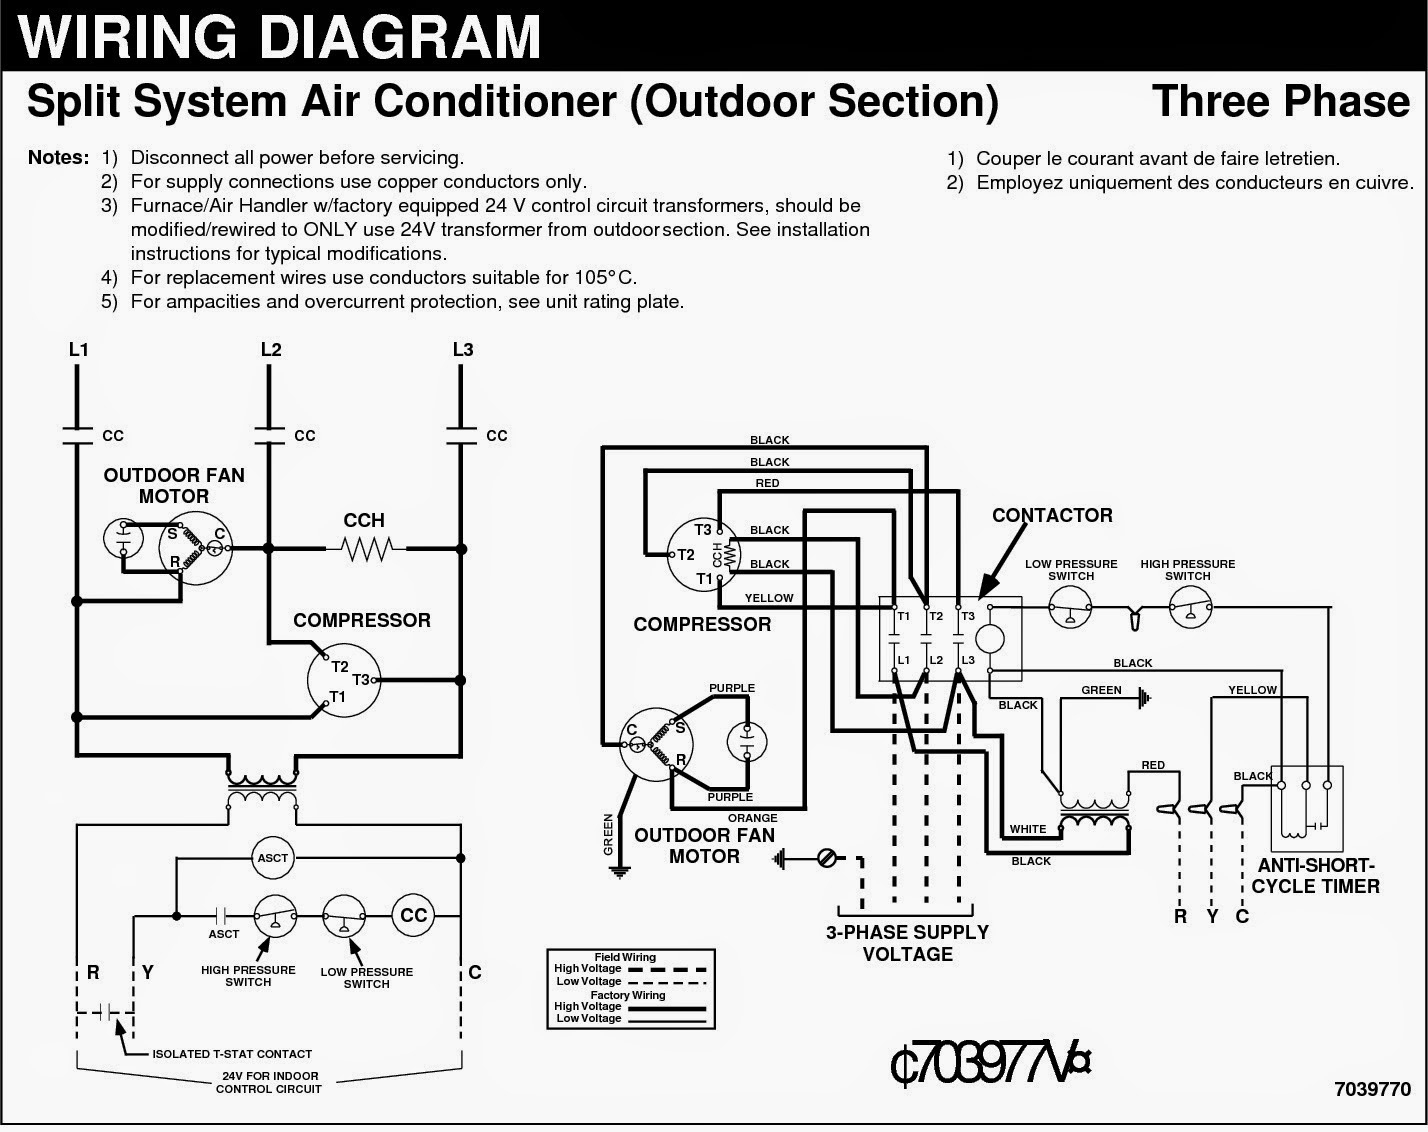 Home Air Conditioner Wiring Diagram - Wiring Diagrams Hubs - Air Conditioner Wiring Diagram